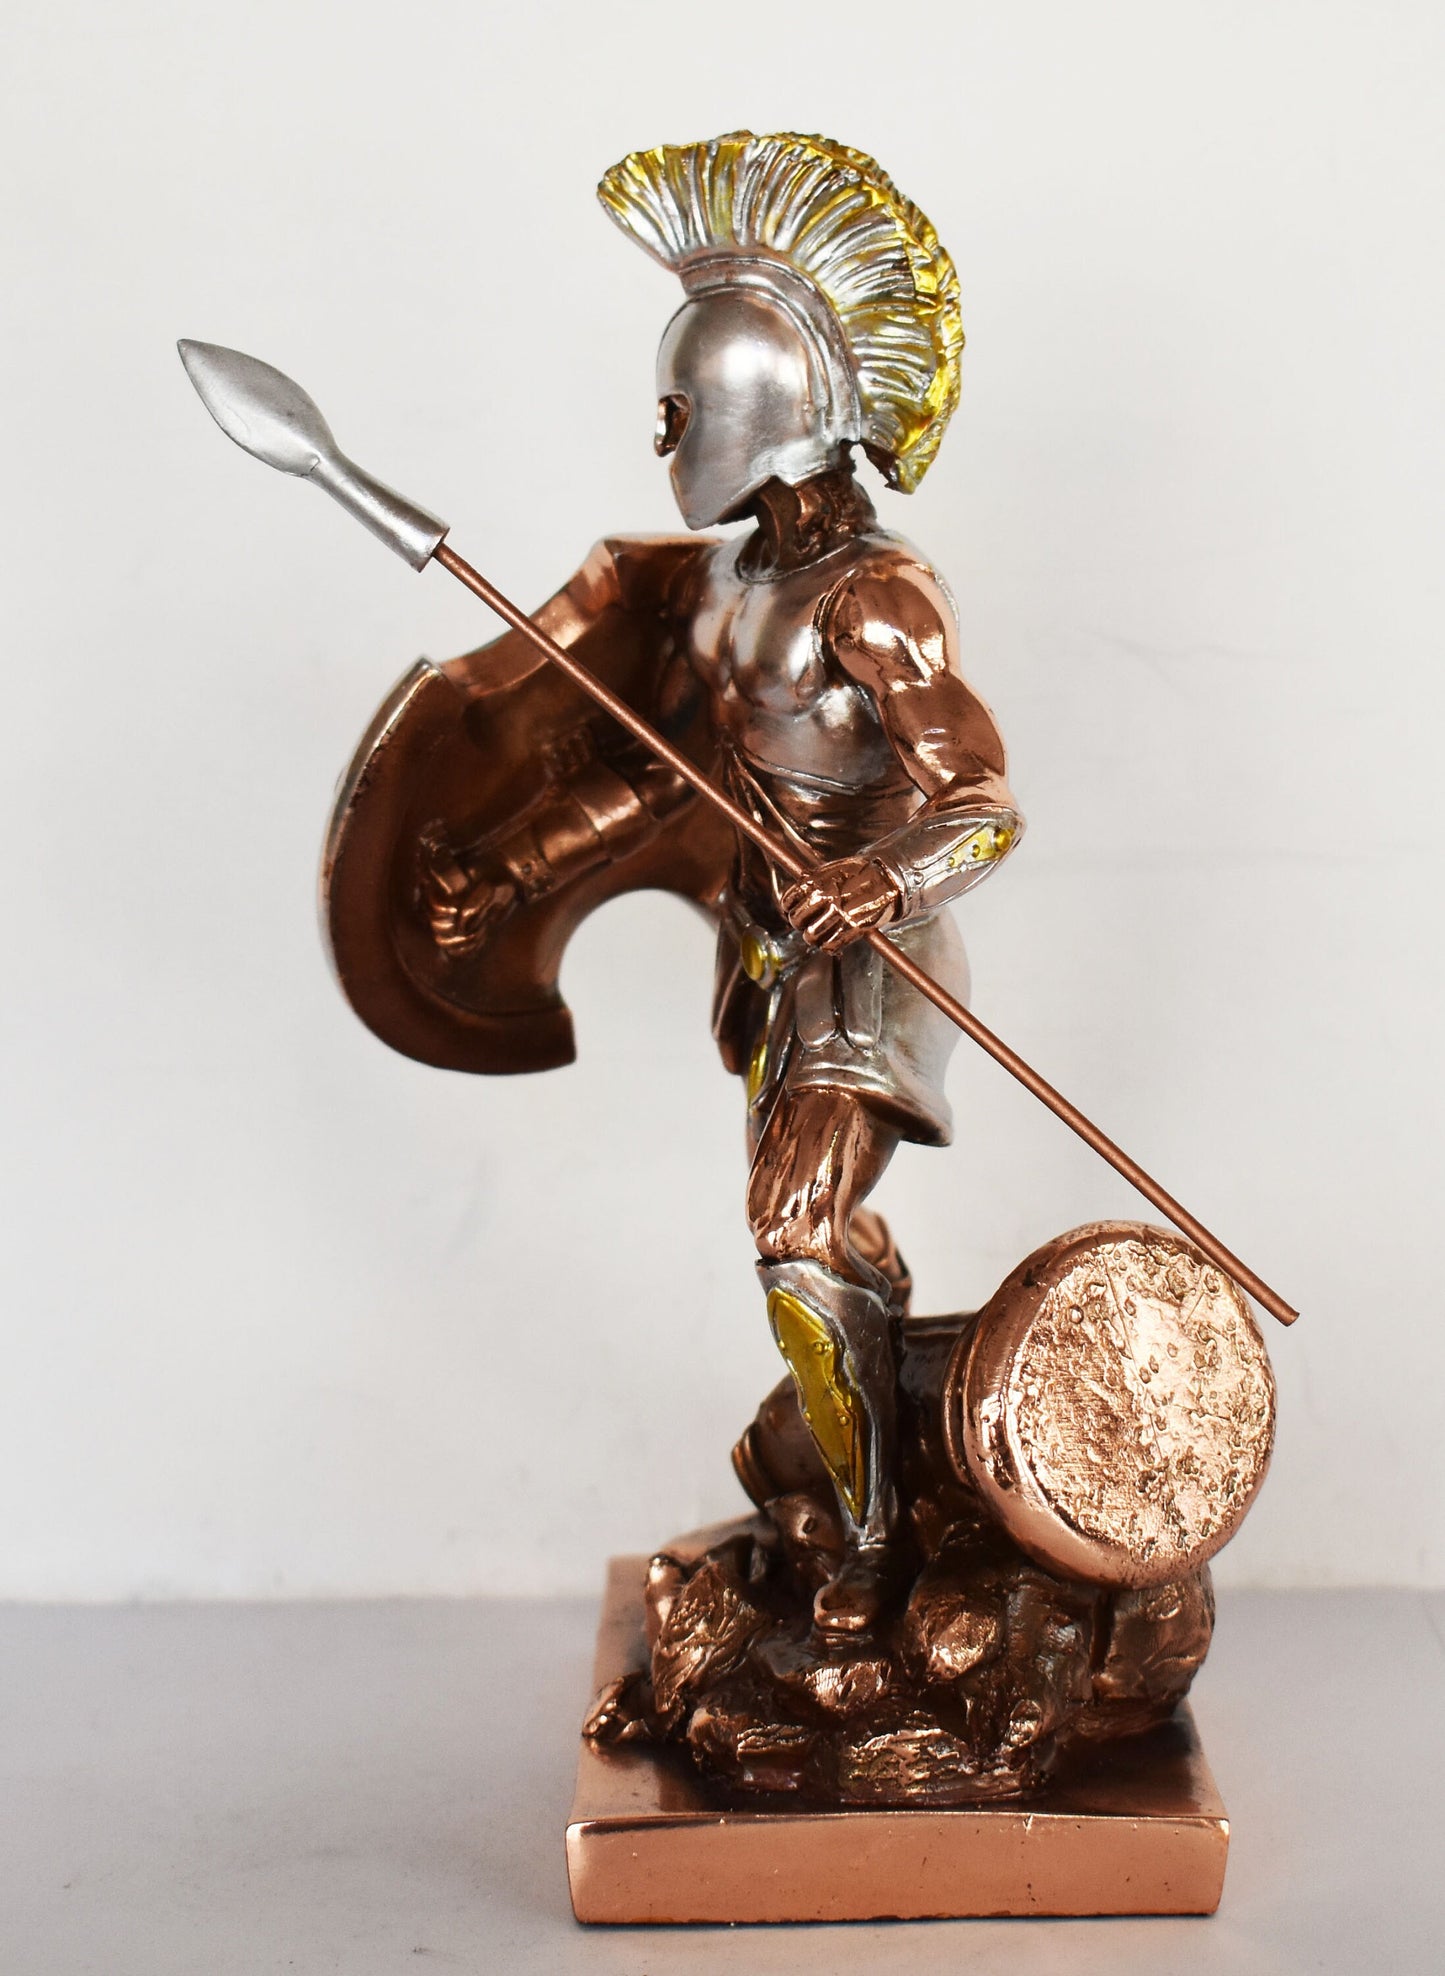 Achilles - King of the Myrmidons - Greek Hero - Son of Thetis - Trojan War - Central character of Homer's Iliad - Copper Plated Alabaster